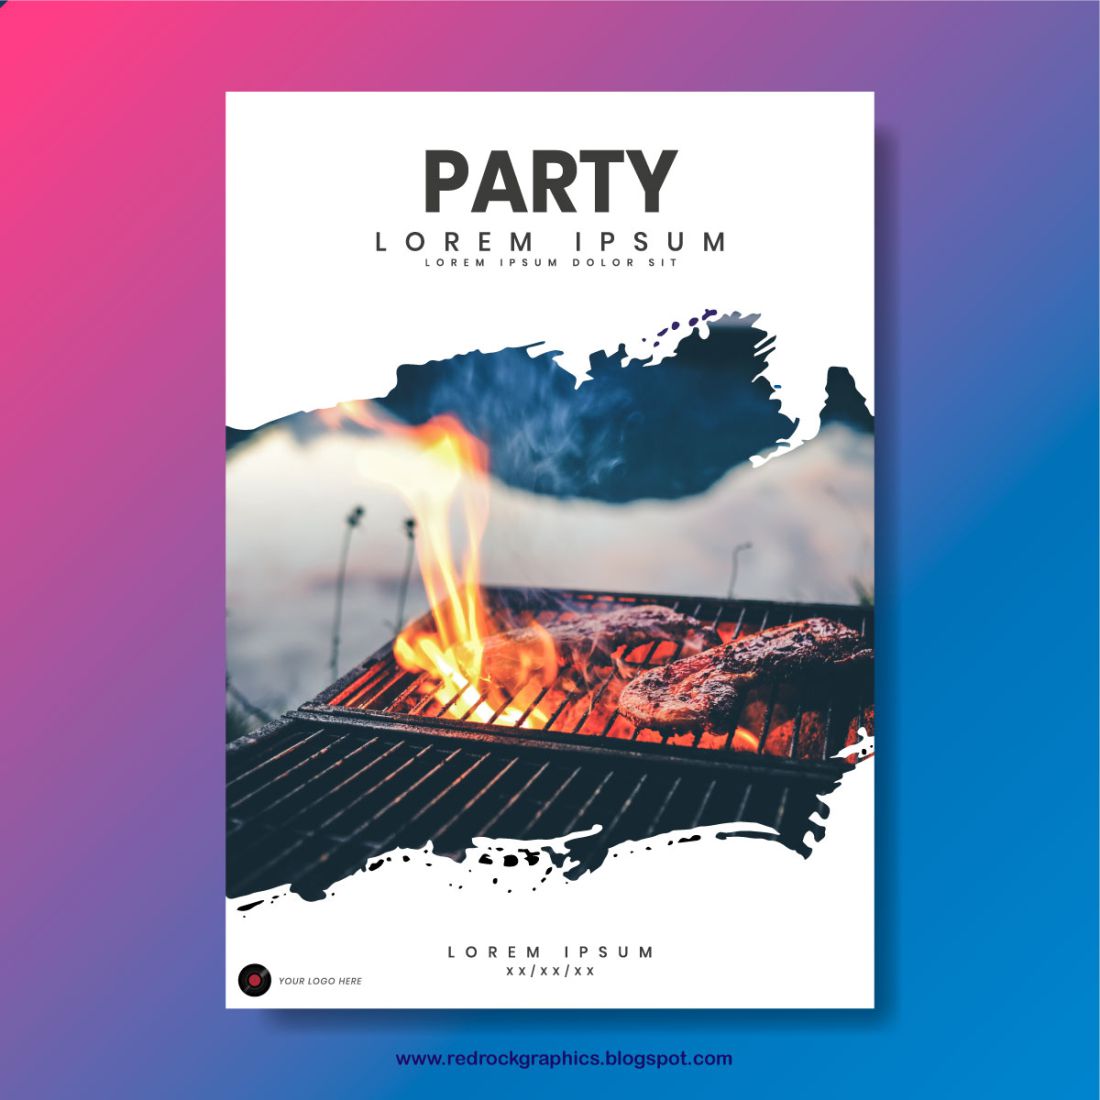 PARTY FLYER TEMPLATE, Party Flyer design, Party Flyer preview image.